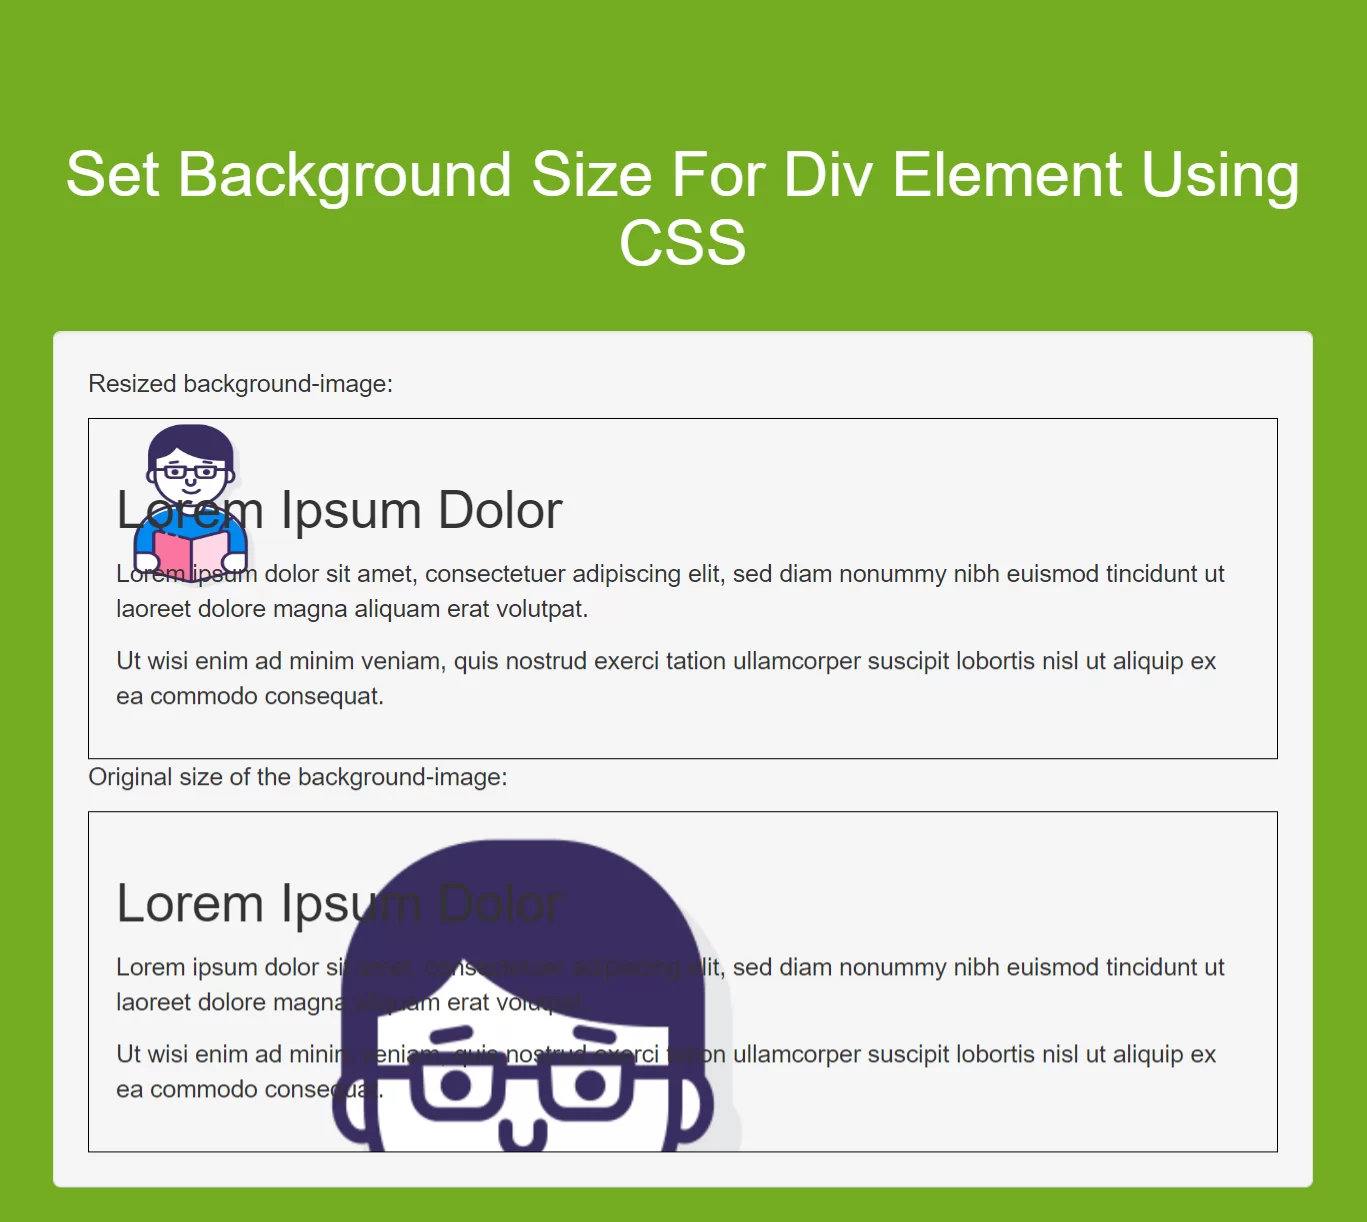 How To Set Background Size For Div Element Using CSS